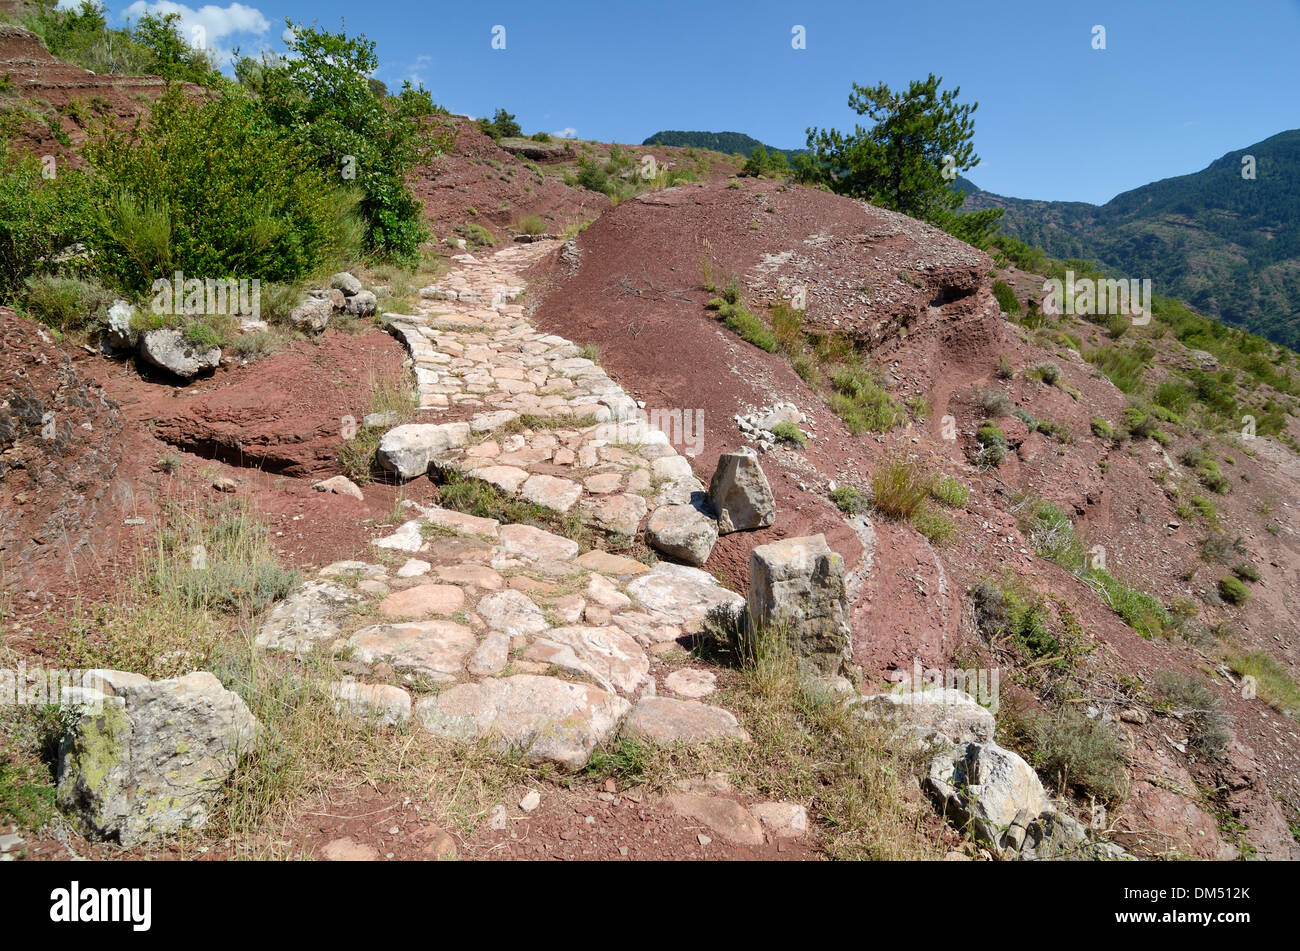 Stone Path part of a Long Distance Footpath or Hiking Trail Daluis Gorge Alpes-Maritimes France Stock Photo